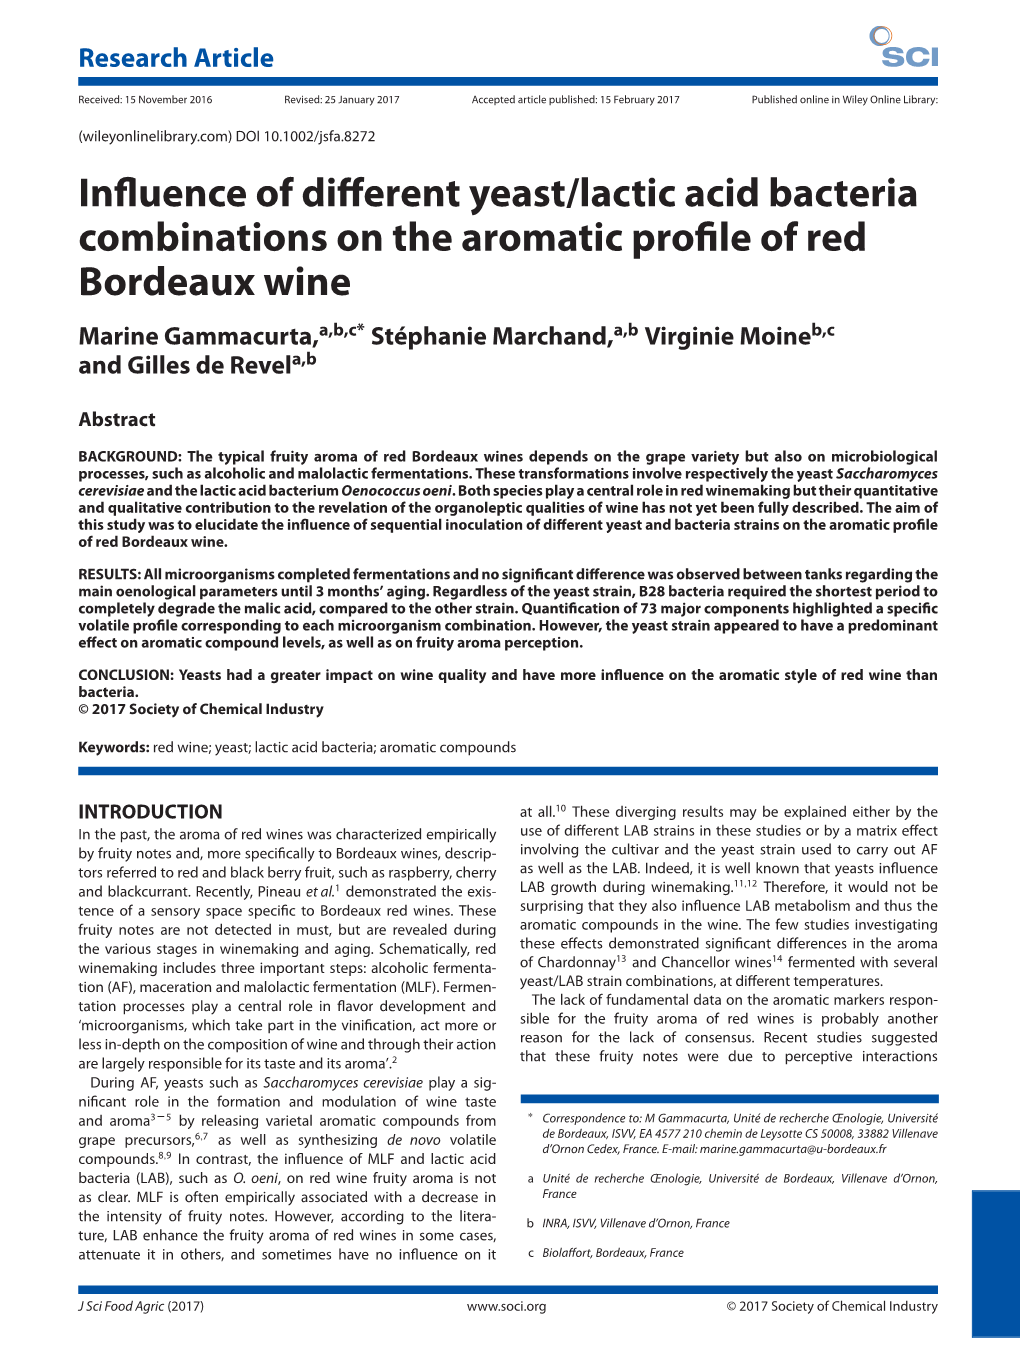 Influence of Different Yeast/Lactic Acid Bacteria Combinations